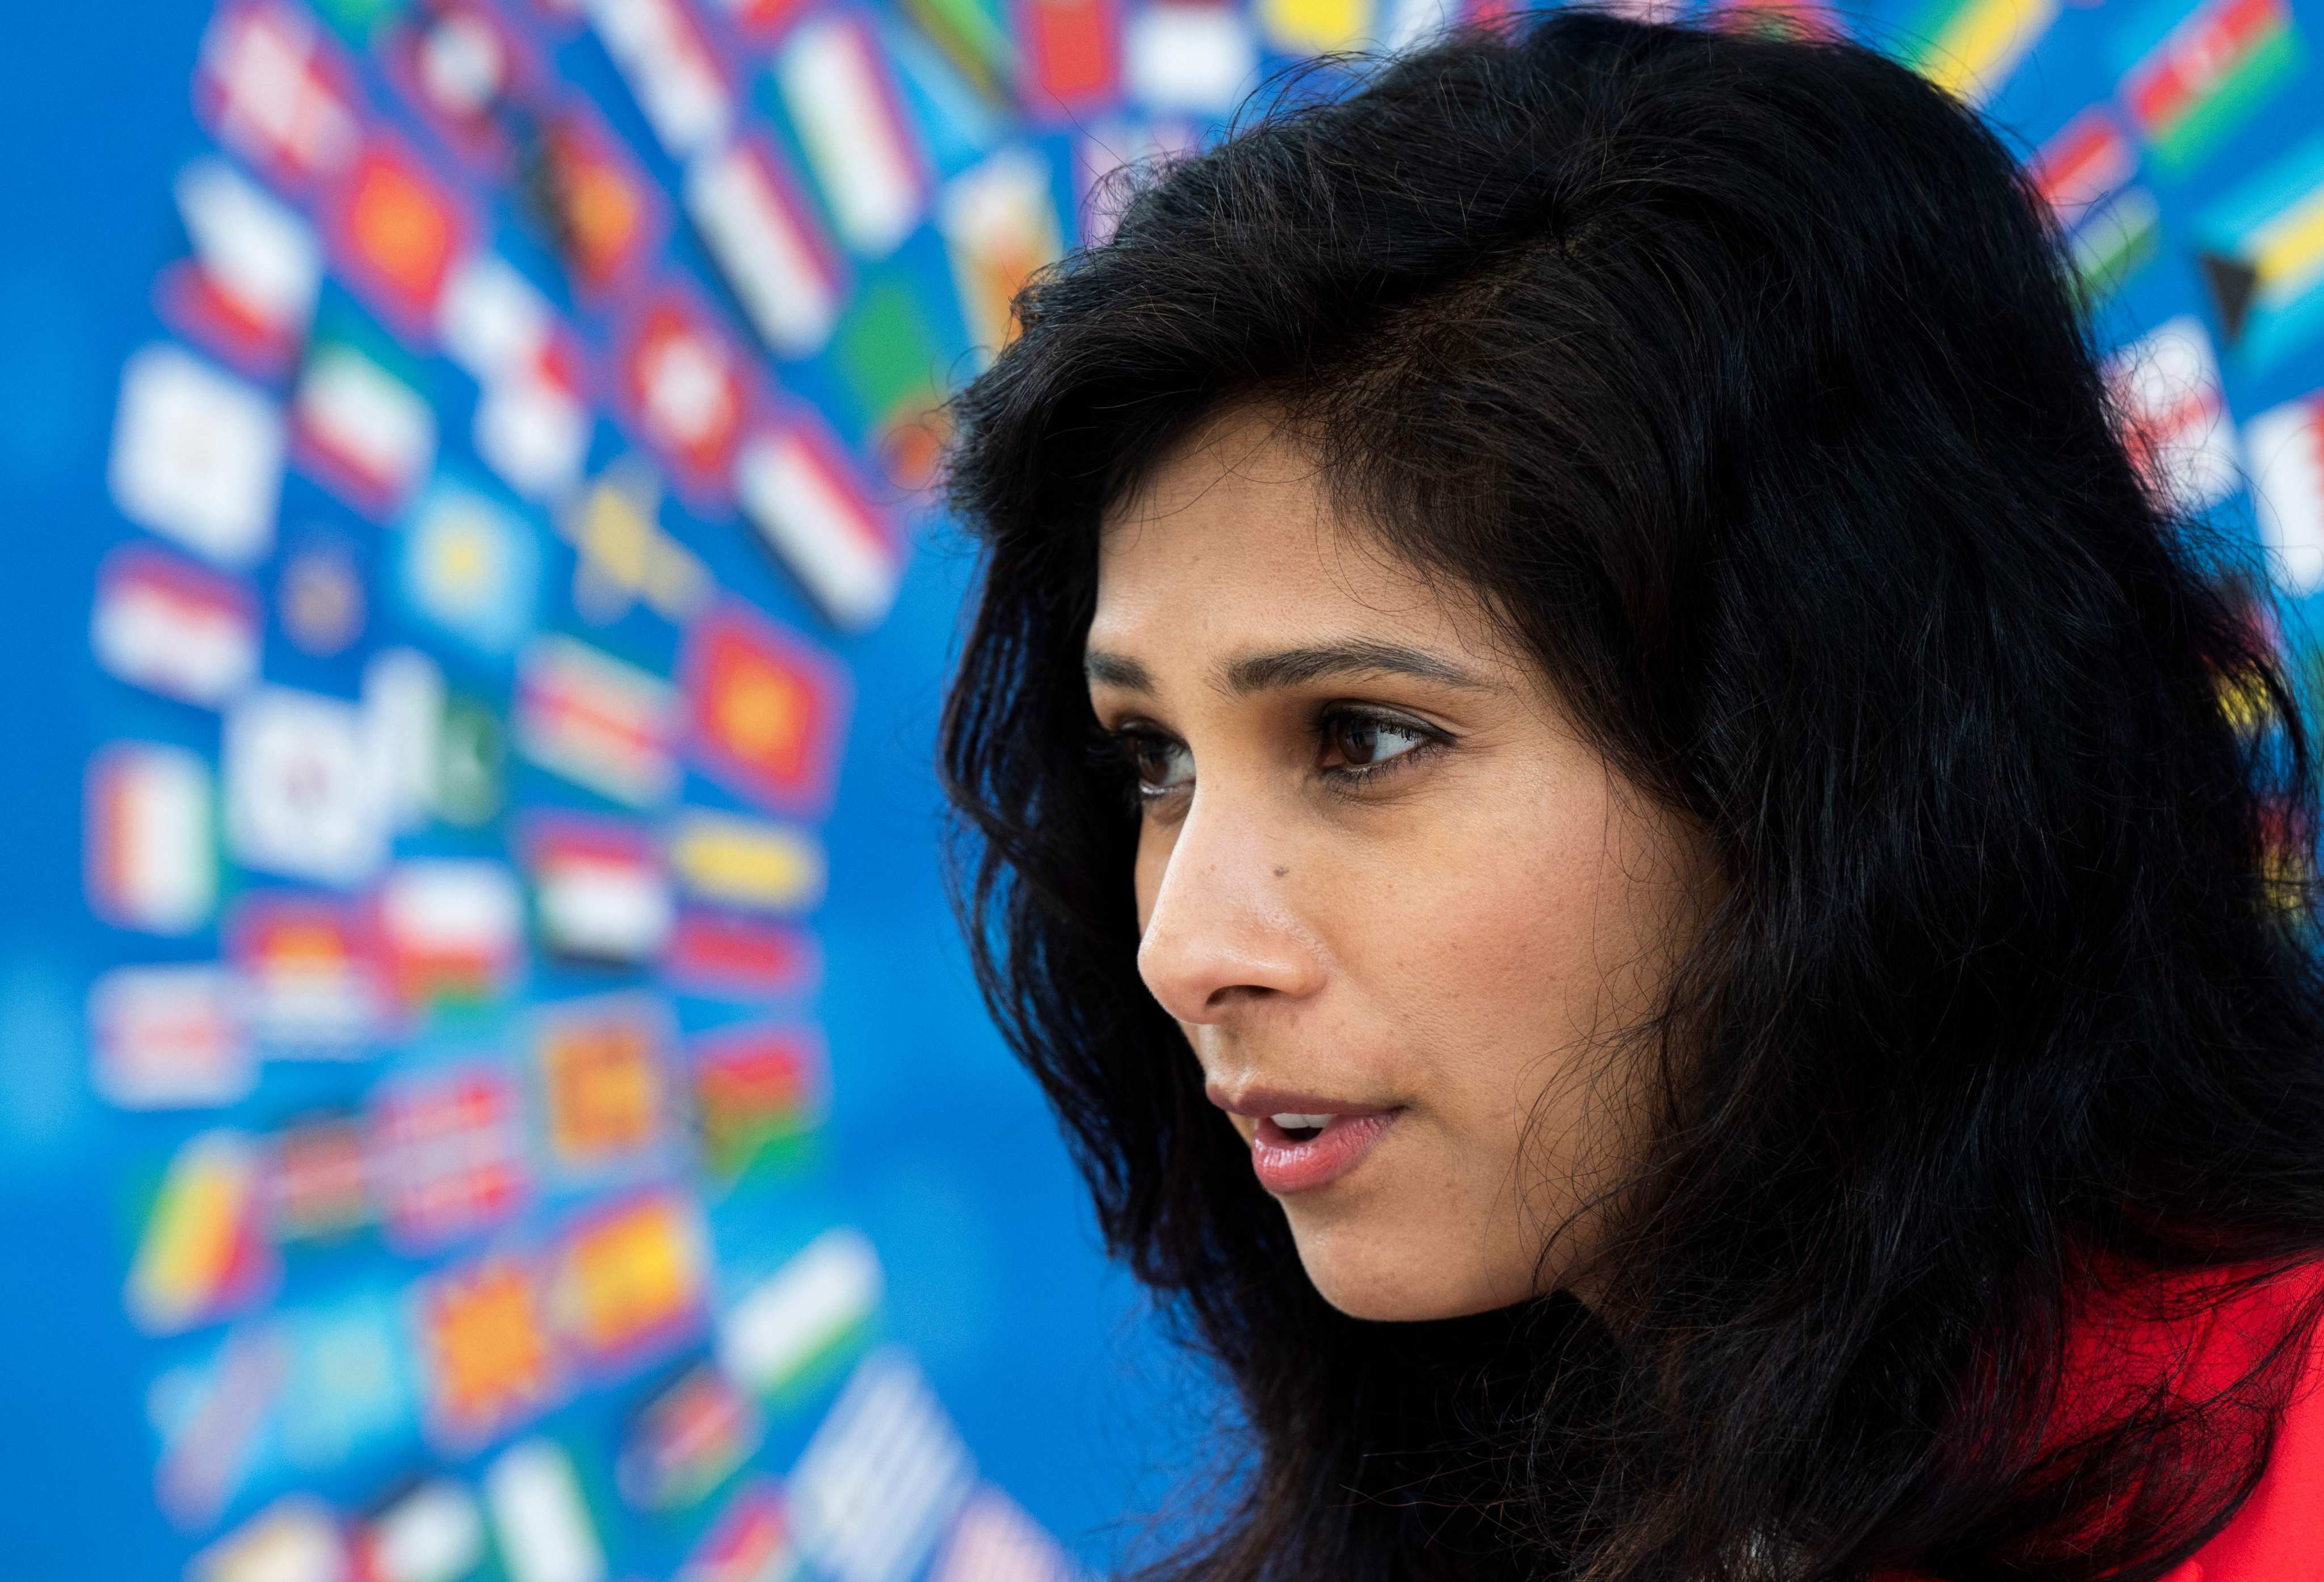 Gita Gopinath, first deputy managing director of the IMF, has issued a warning about the economic consequences of continued geopolitical division. Photo: AFP